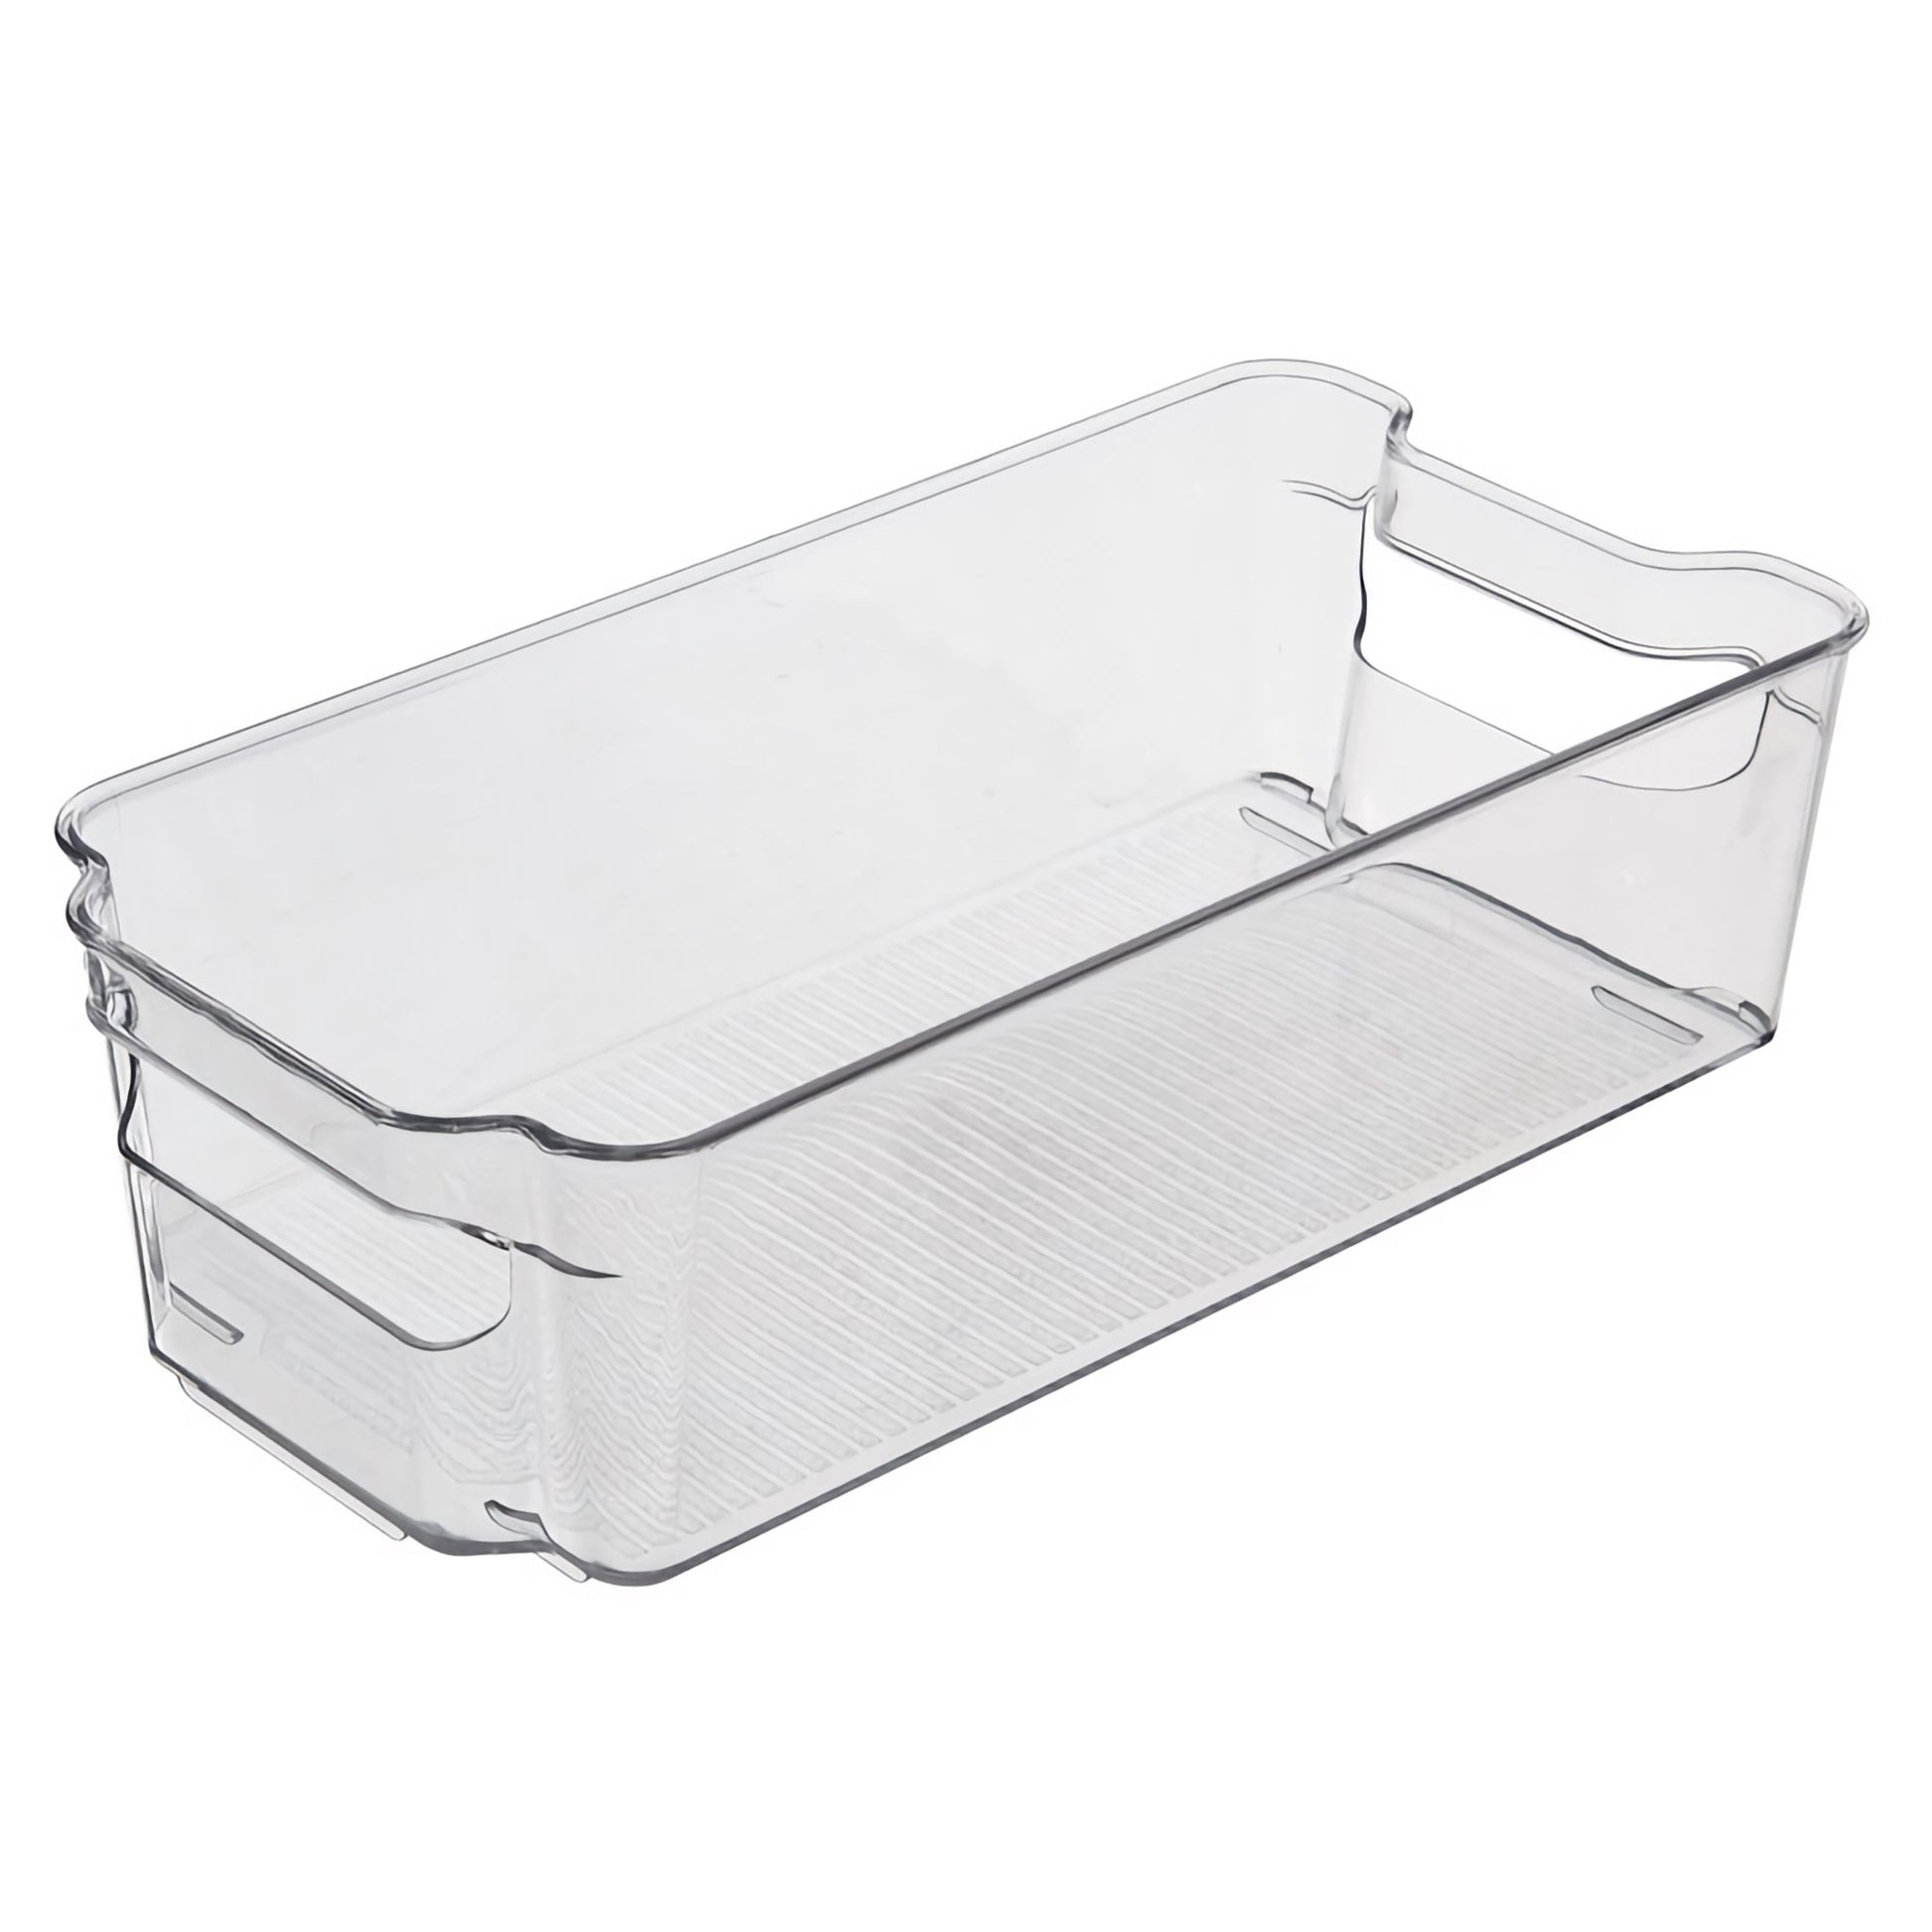 Fridge Organiser (Small) - Household Storage Containers - The Organisy